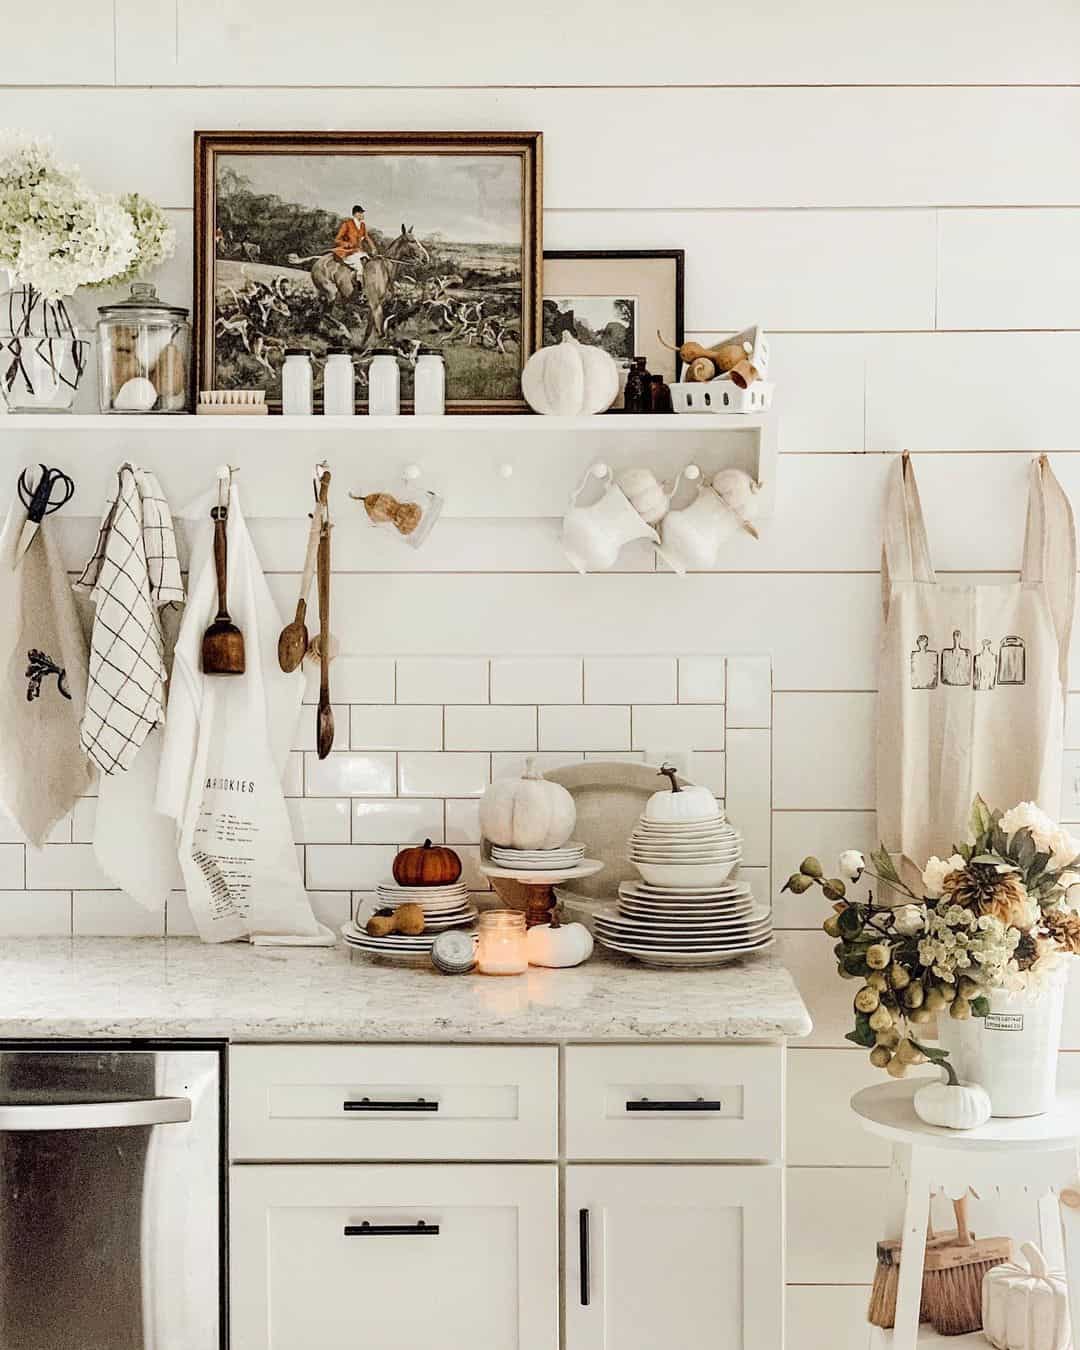 White Cabinets with Black Hardware Kitchen Ideas; white kitchen cabinets with black hardware for a beautifully classic farmhouse kitchen